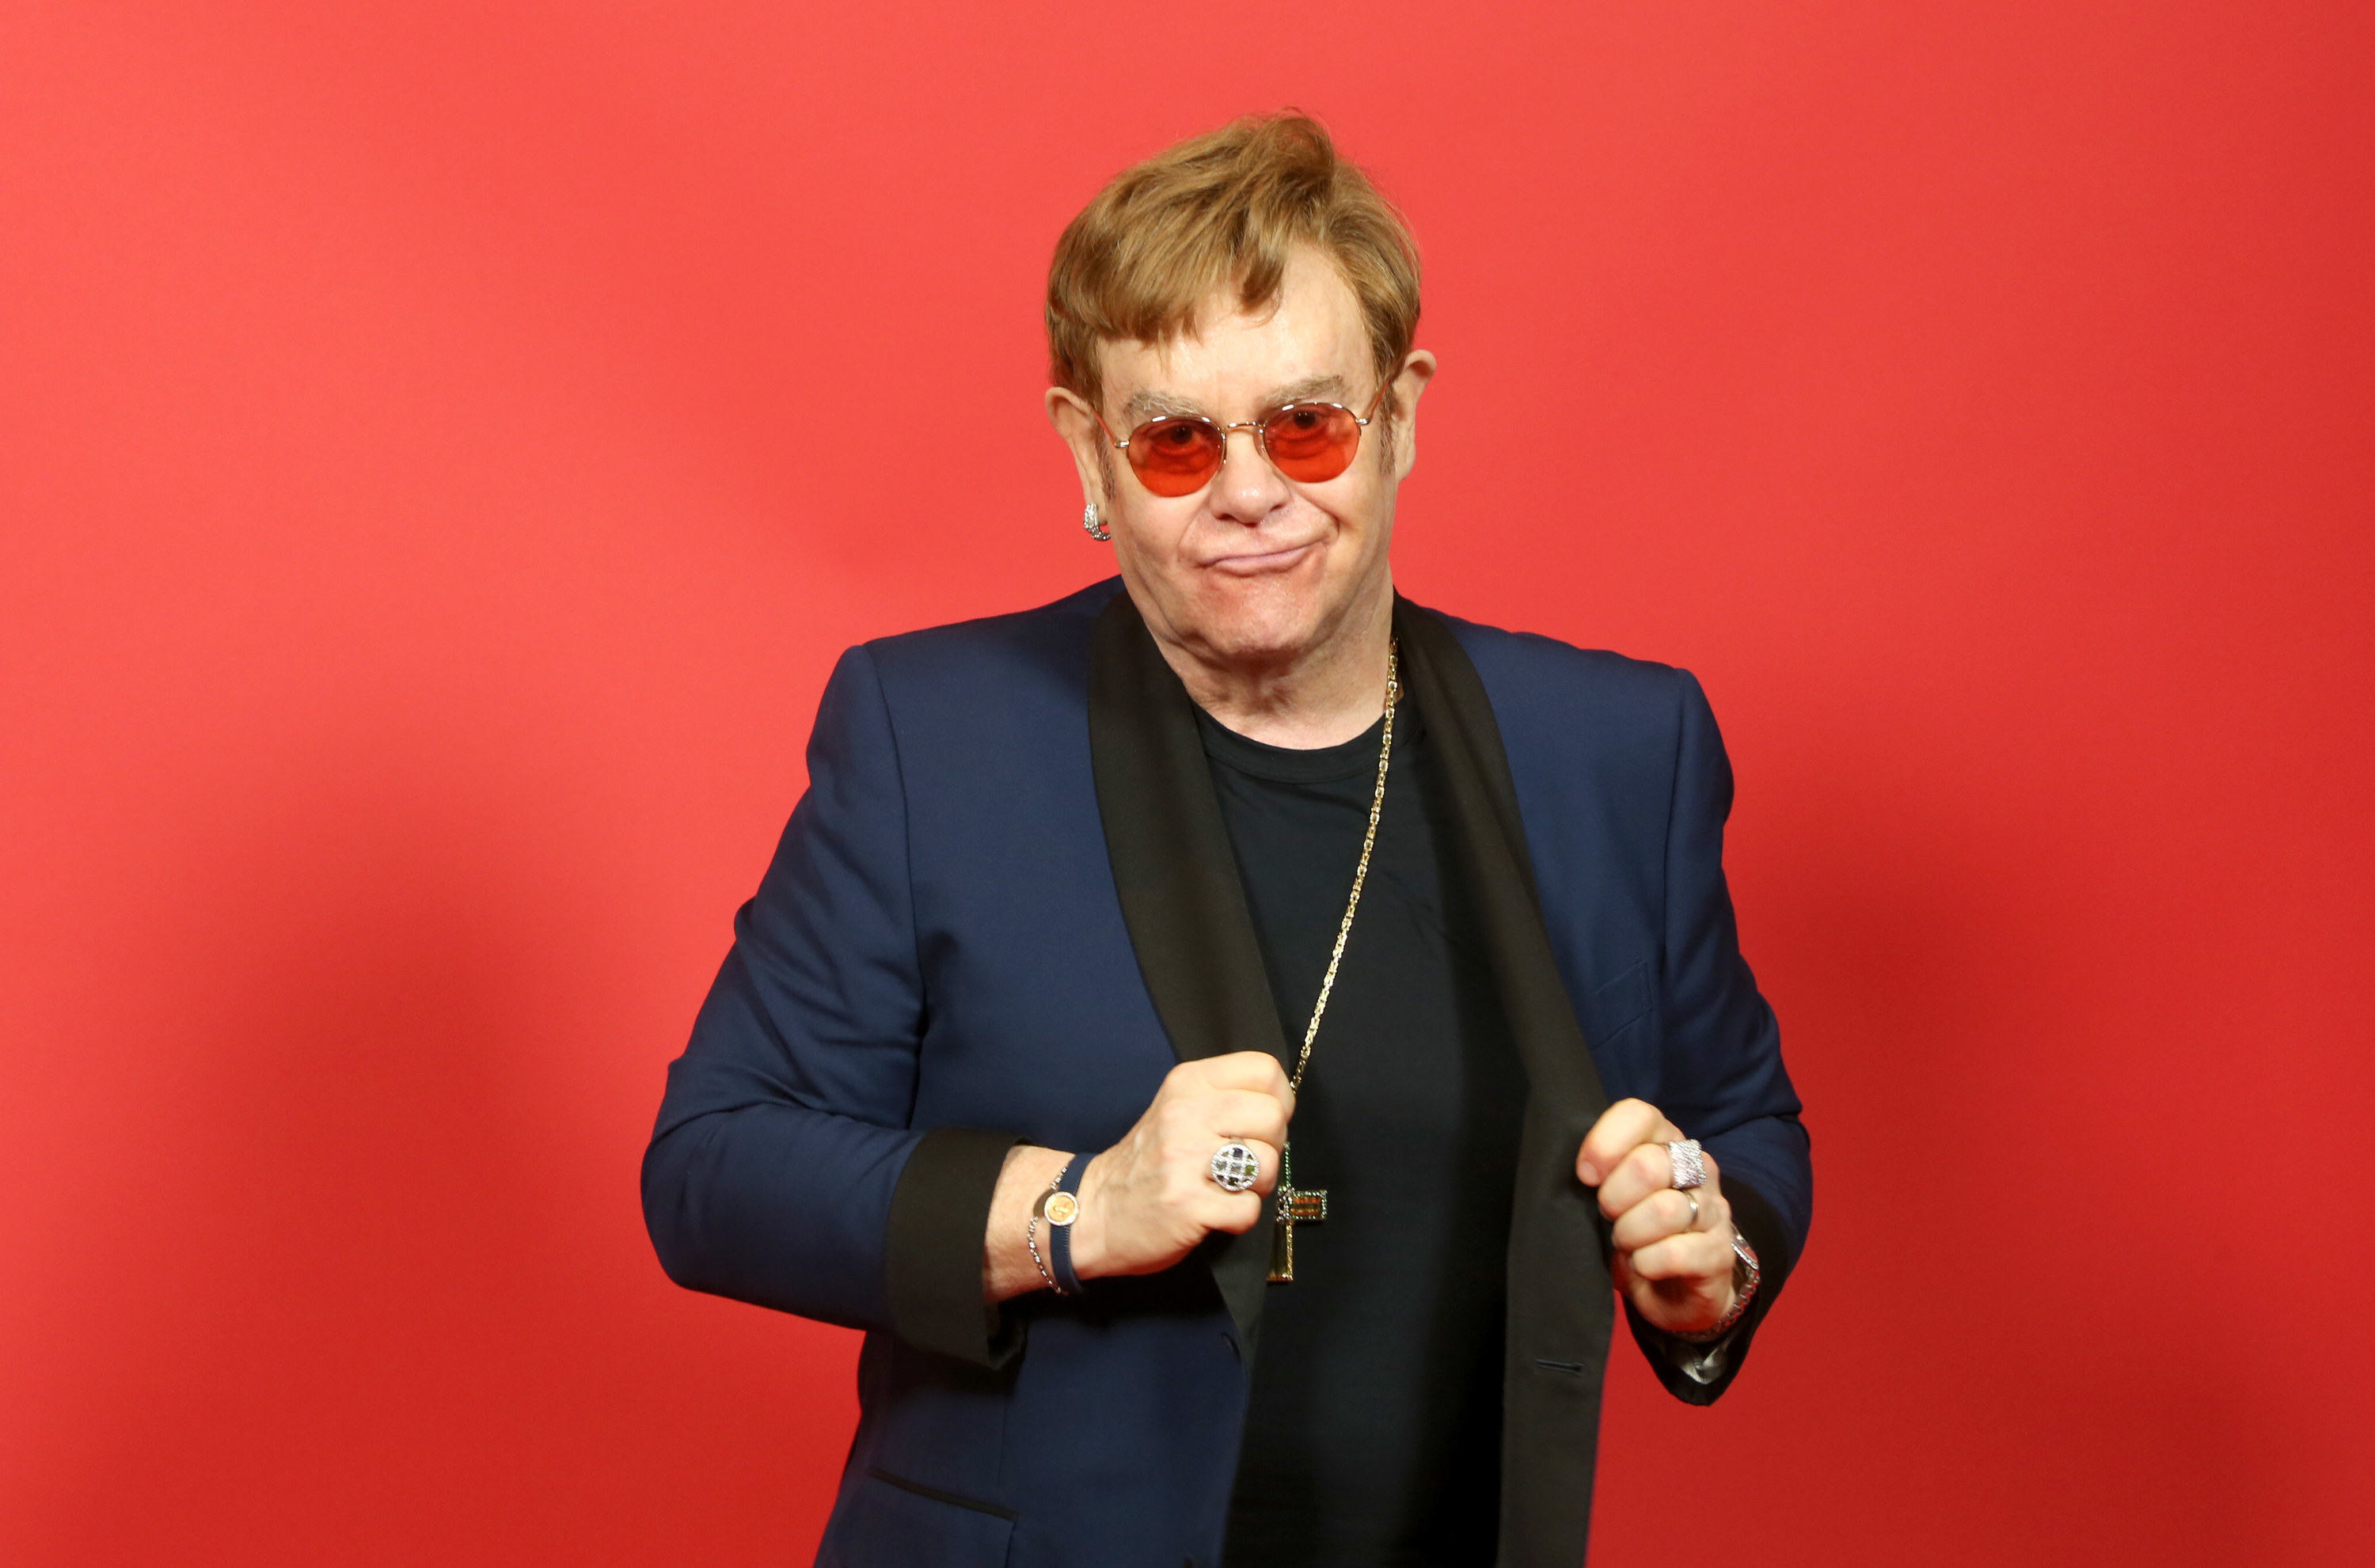 Honoree Elton John attends the 2021 iHeartRadio Music Awards at The Dolby Theatre in Los Angeles, California